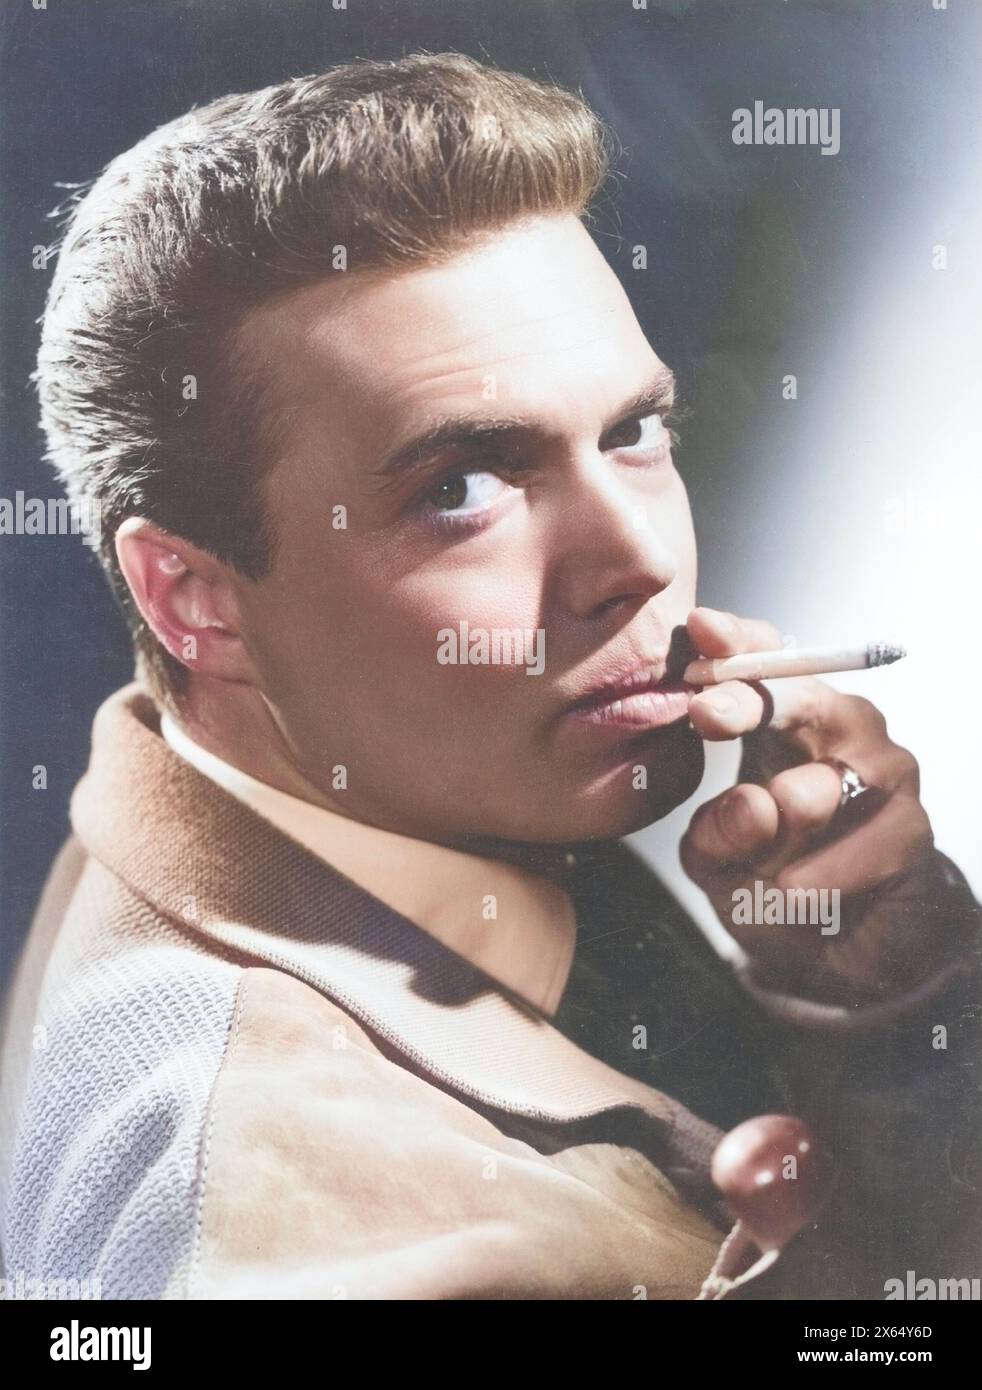 Boehm, KarlHeinz, 16.3.1928 - 29.5.2014, Austrian actor, portrait, smoking, 1950s, ADDITIONAL-RIGHTS-CLEARANCE-INFO-NOT-AVAILABLE Stock Photo